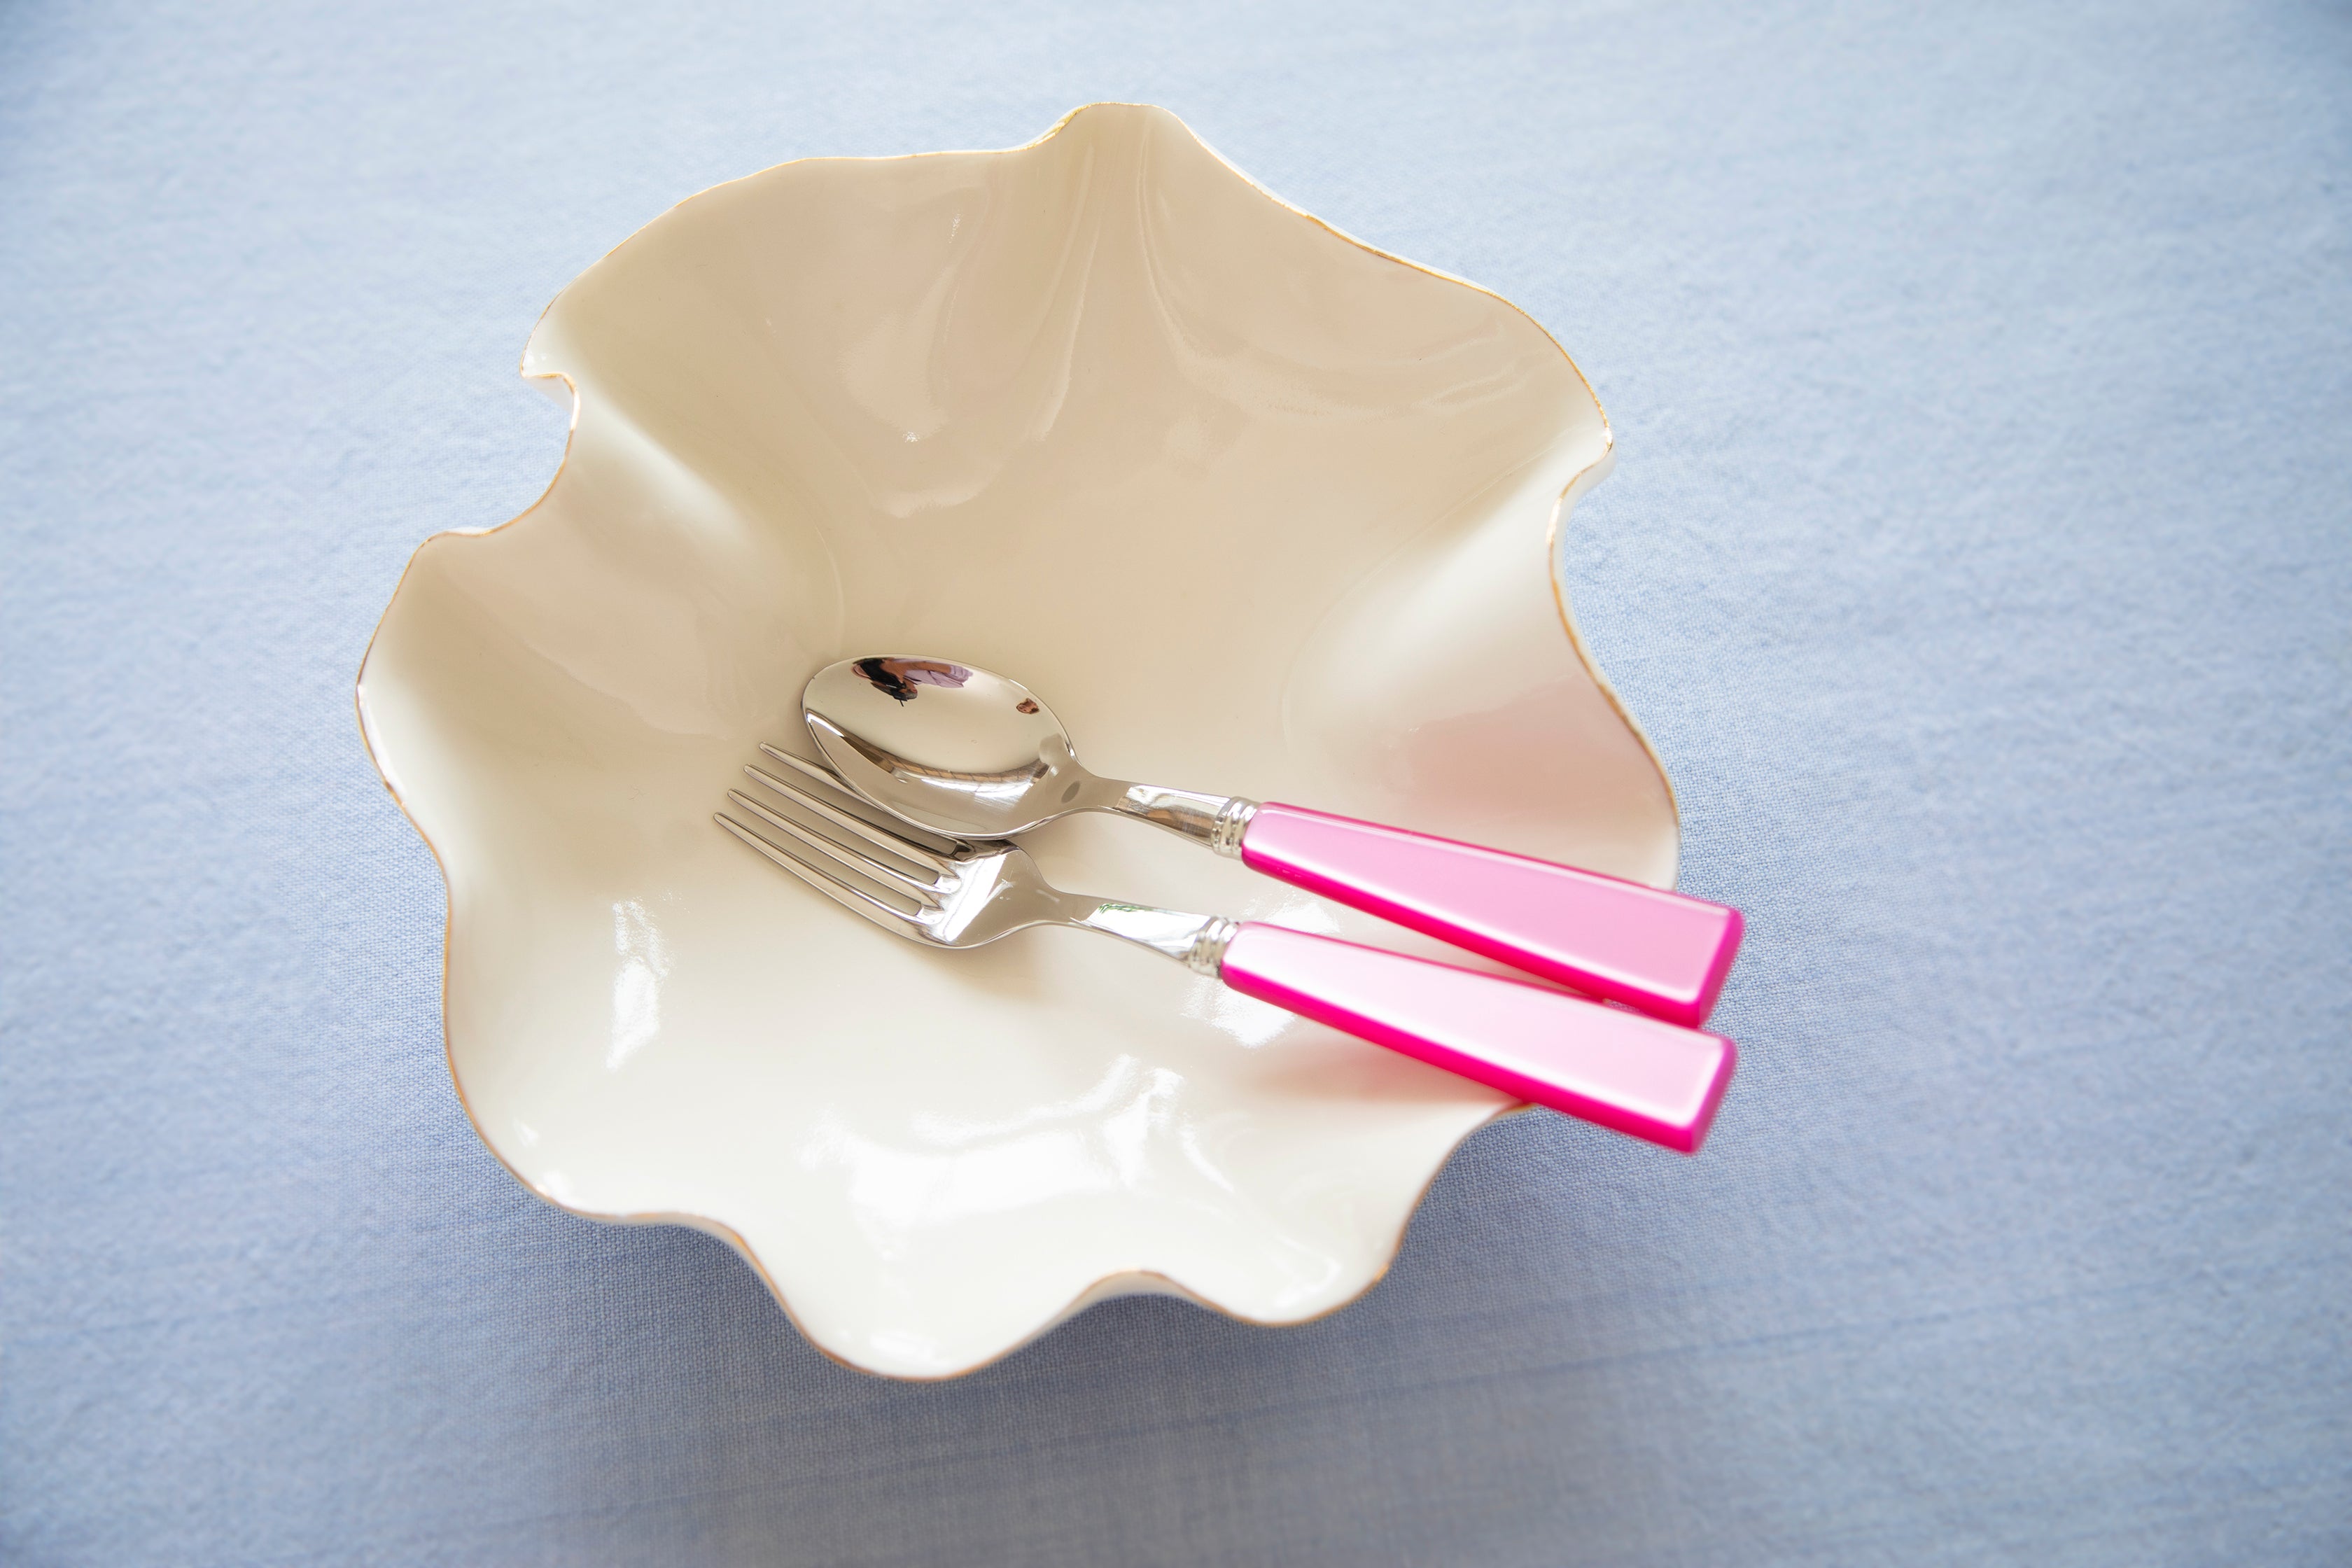 Sabre Icone Pink teaspoon and cake fork